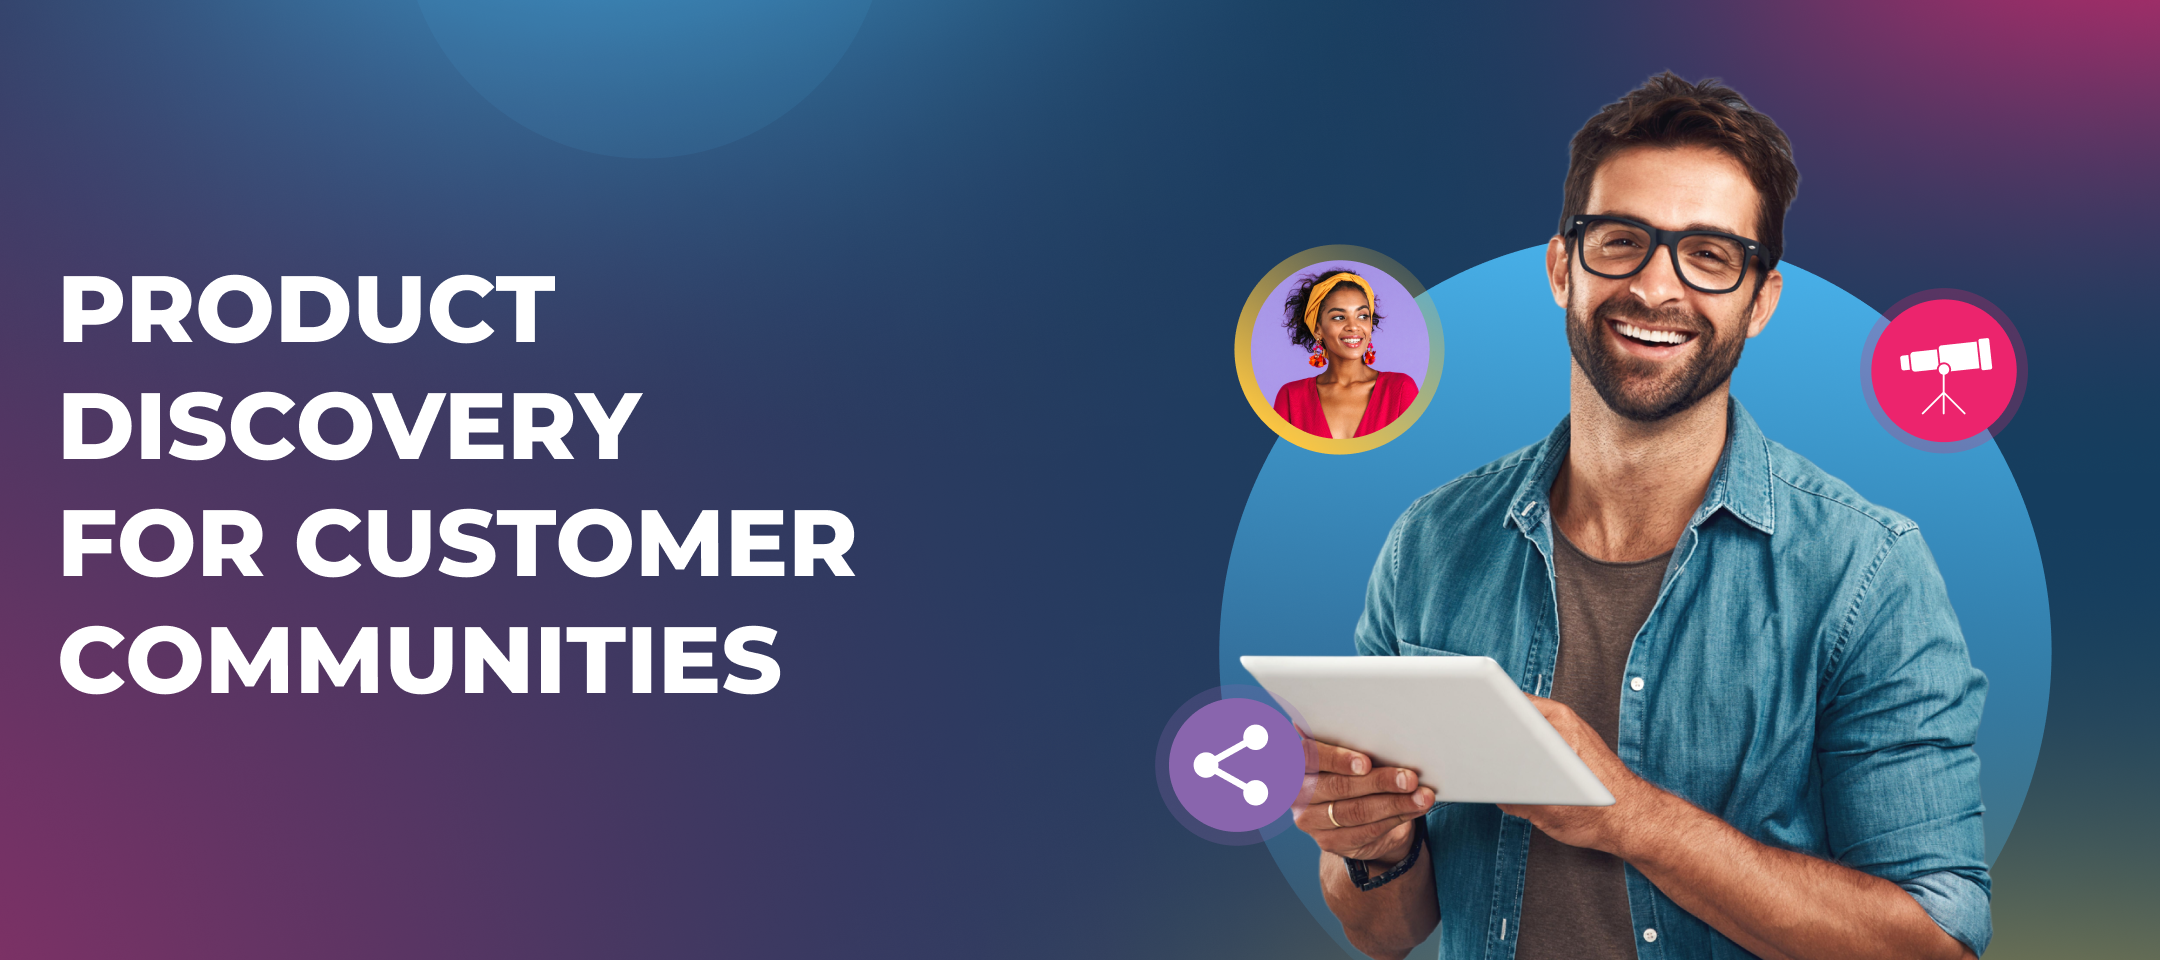 Join our Product Discovery group for Customer Communities!